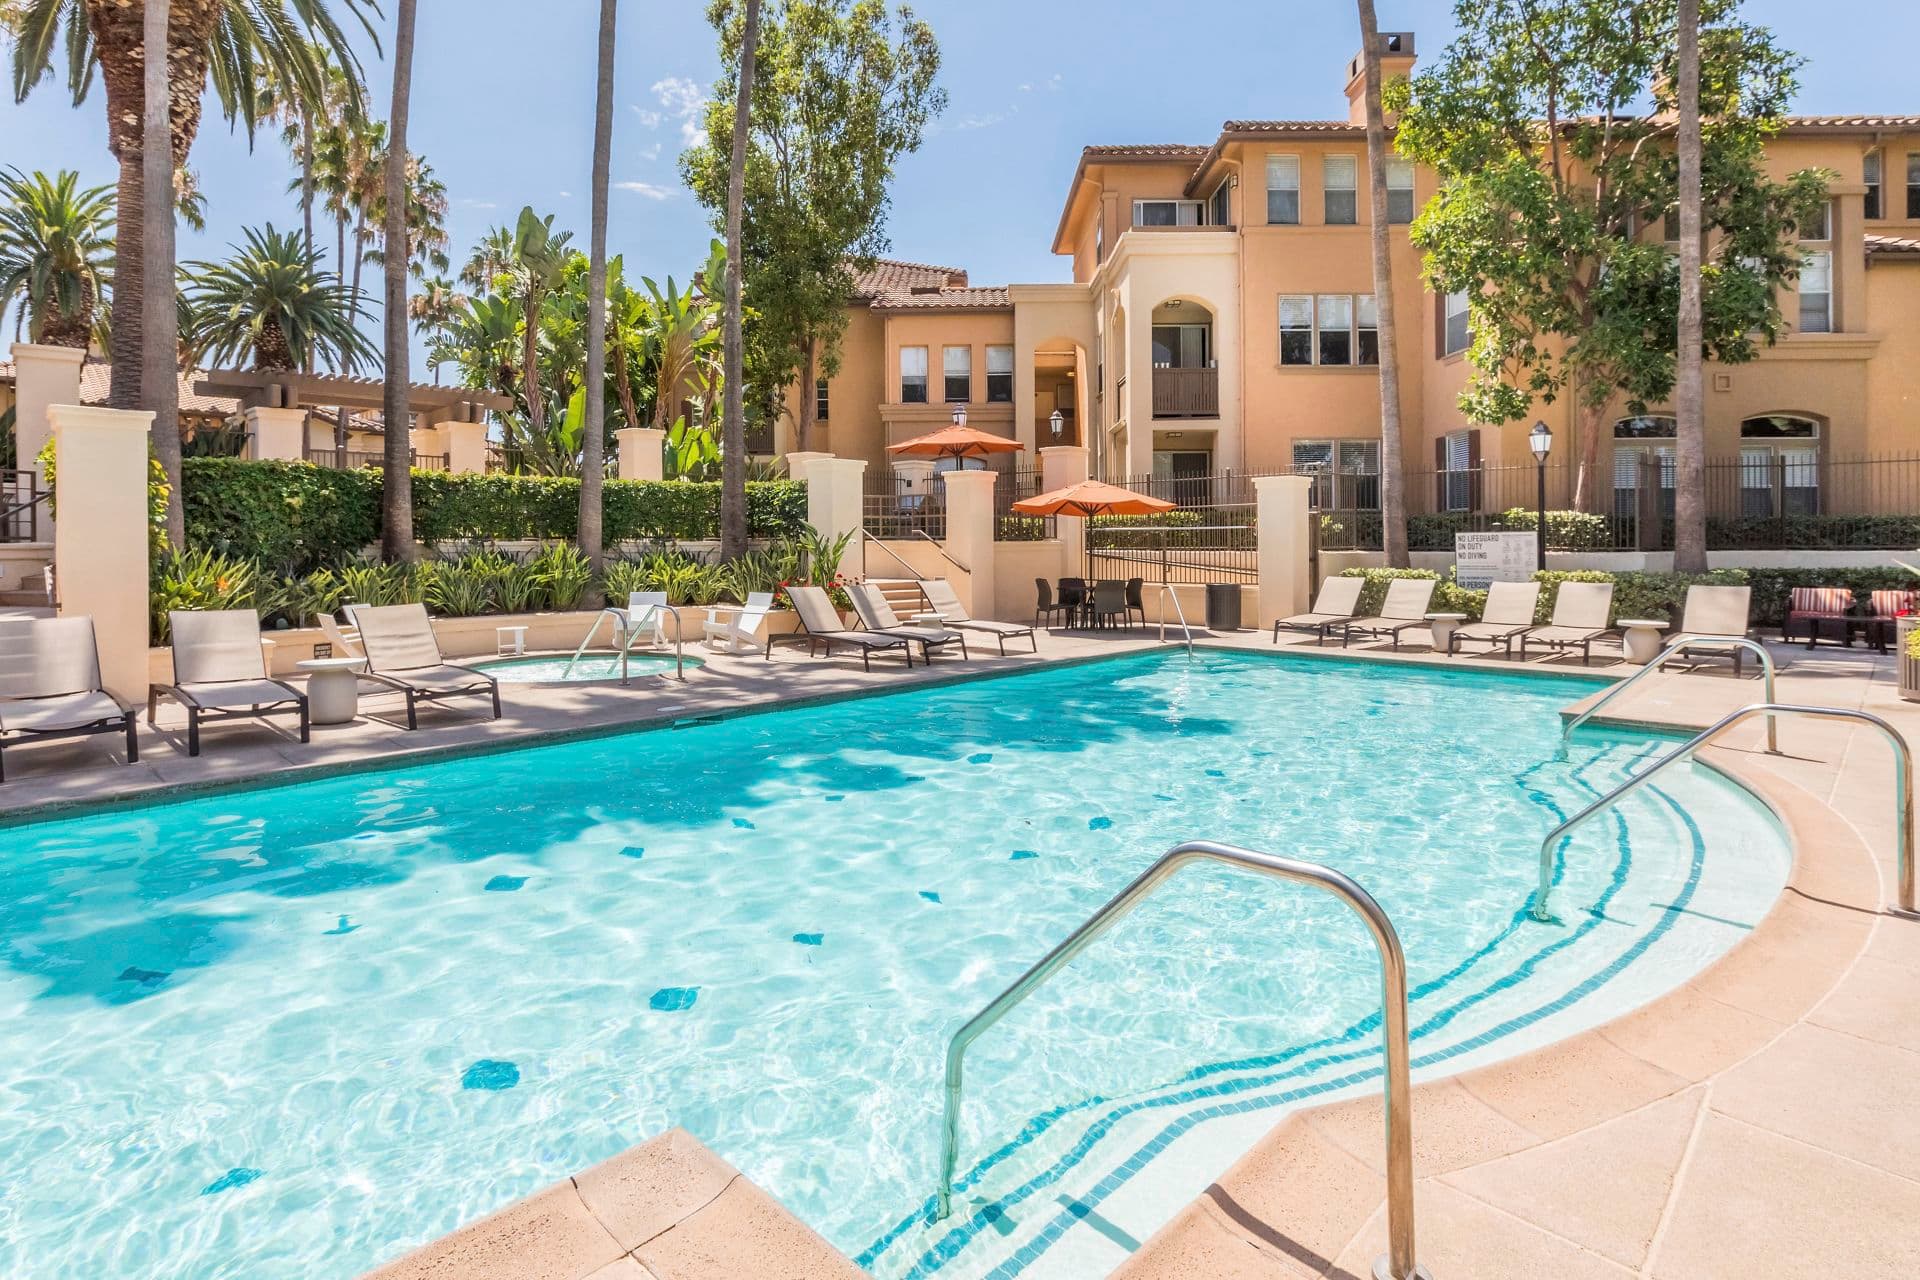 Exterior view of the Pool and Patio at Sierra Vista